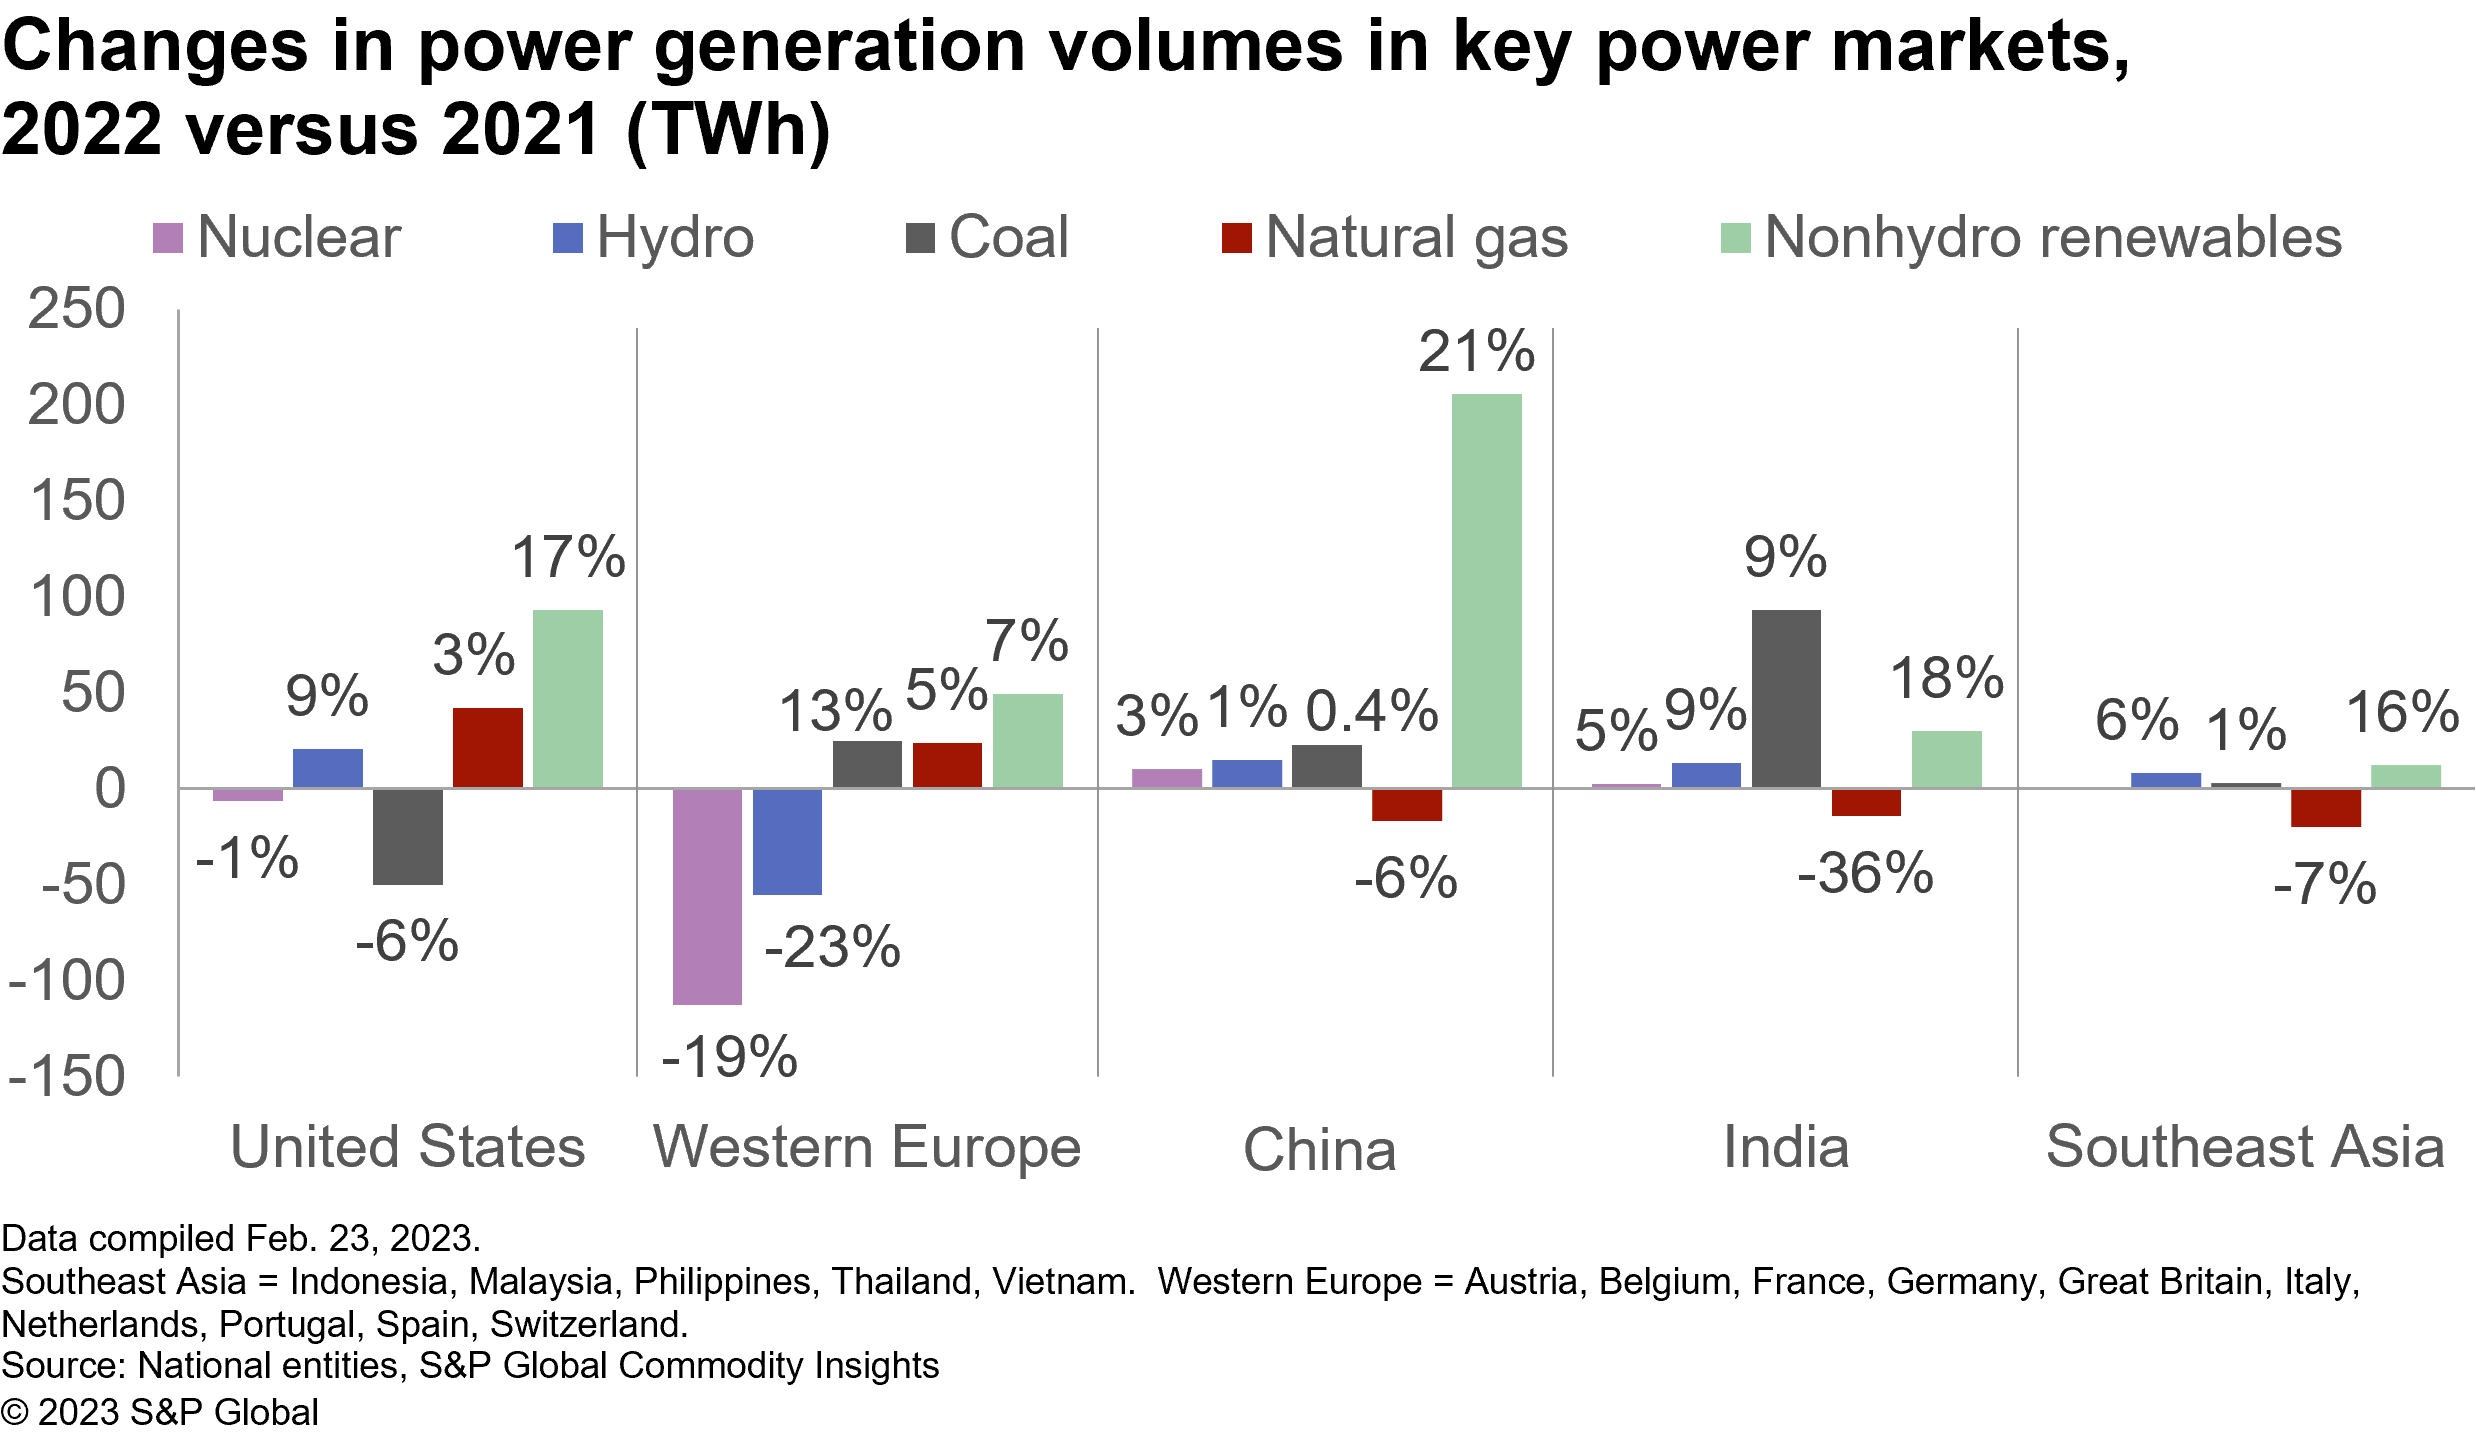 Changes in power generation volumes in key power markets, 2022 vs 2021 (TWh)